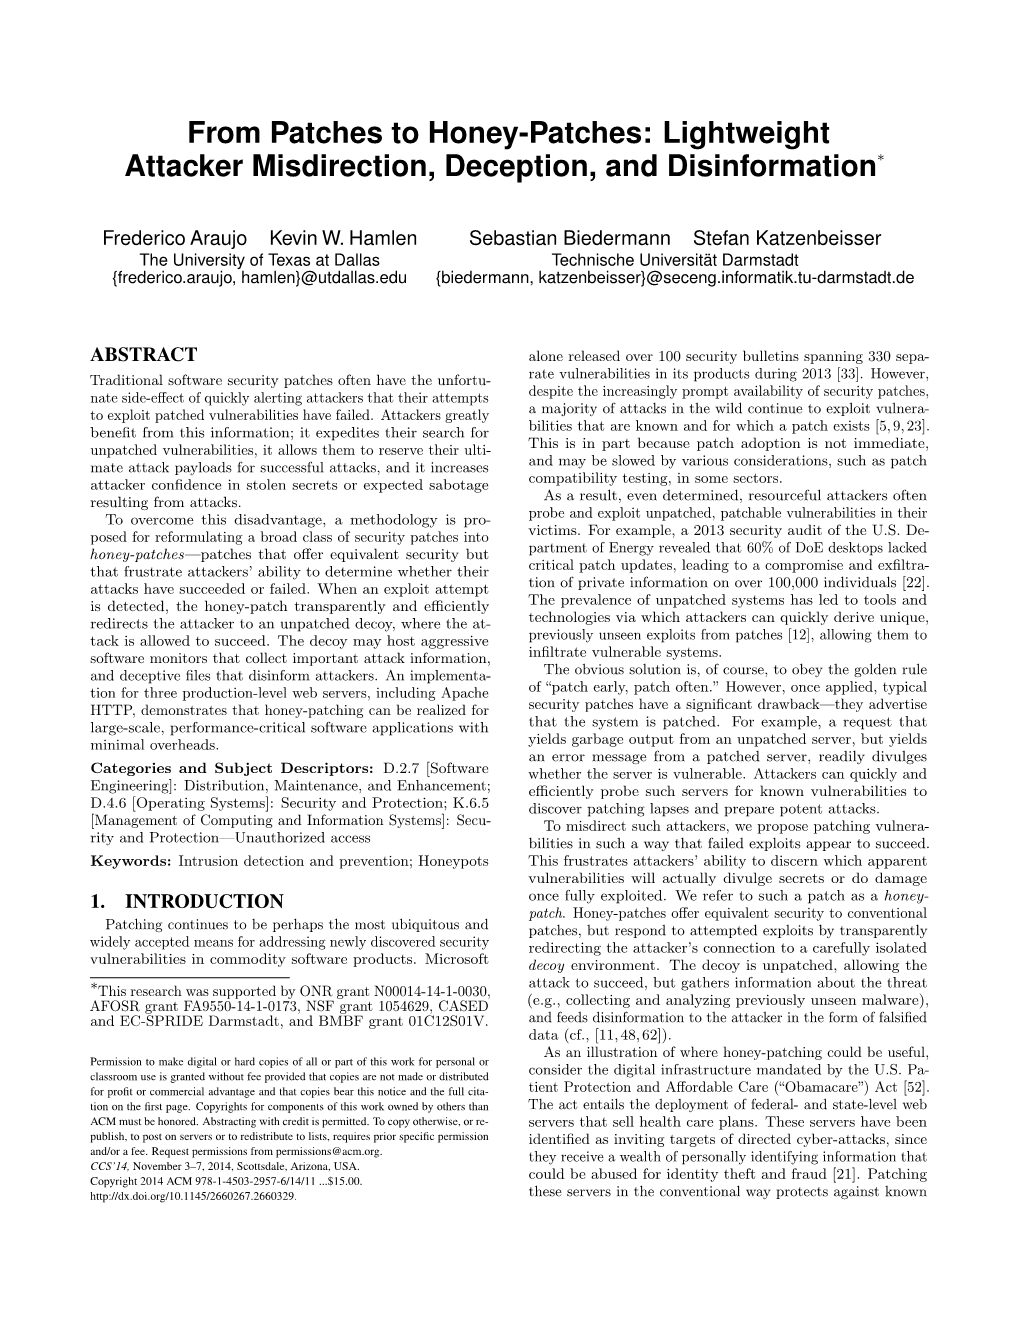 From Patches to Honey-Patches: Lightweight Attacker Misdirection, Deception, and Disinformation∗